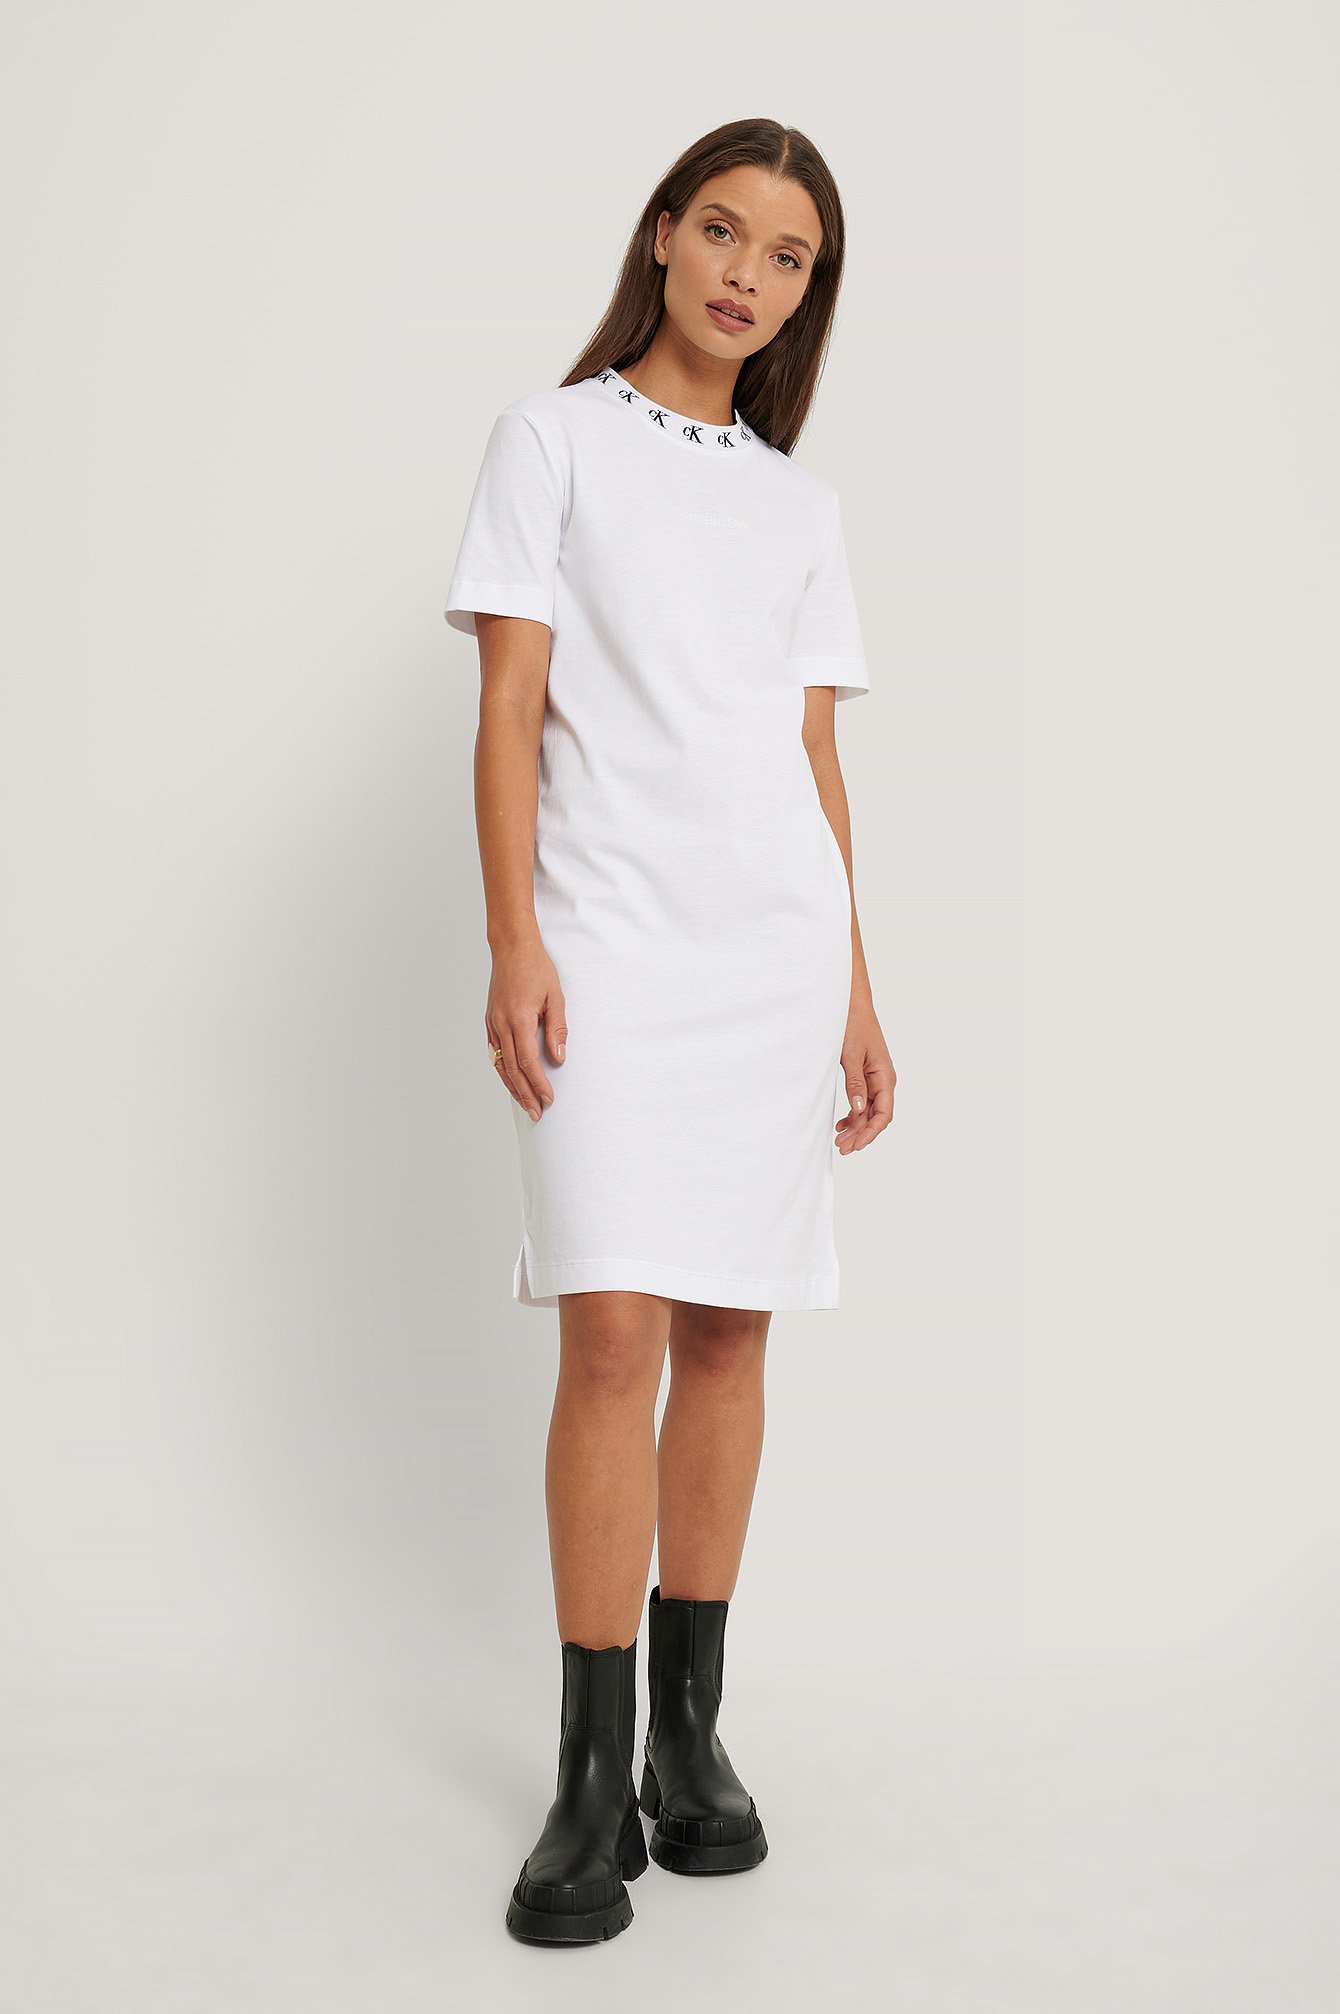 Mysterie zoogdier abces T shirt dresses | Find tee shirt dress for women at NA-KD | NA-KD